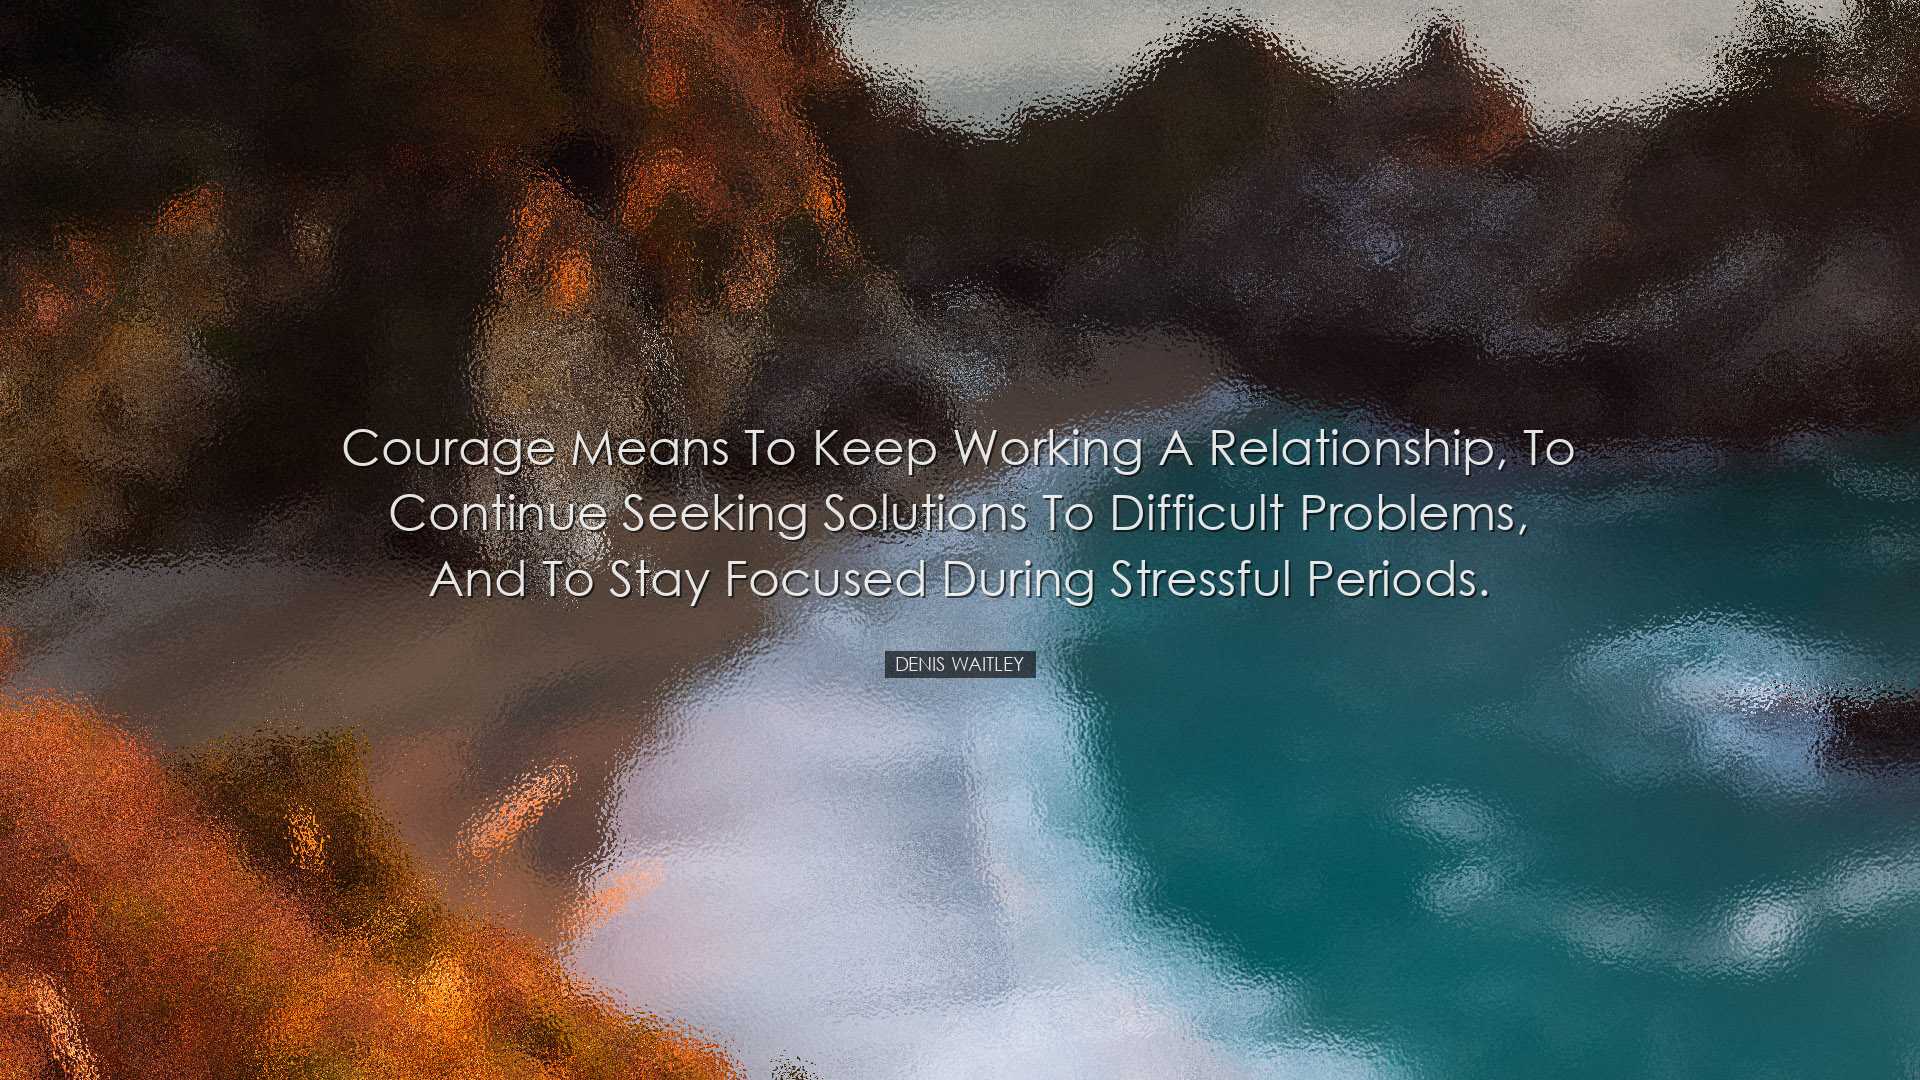 Courage means to keep working a relationship, to continue seeking